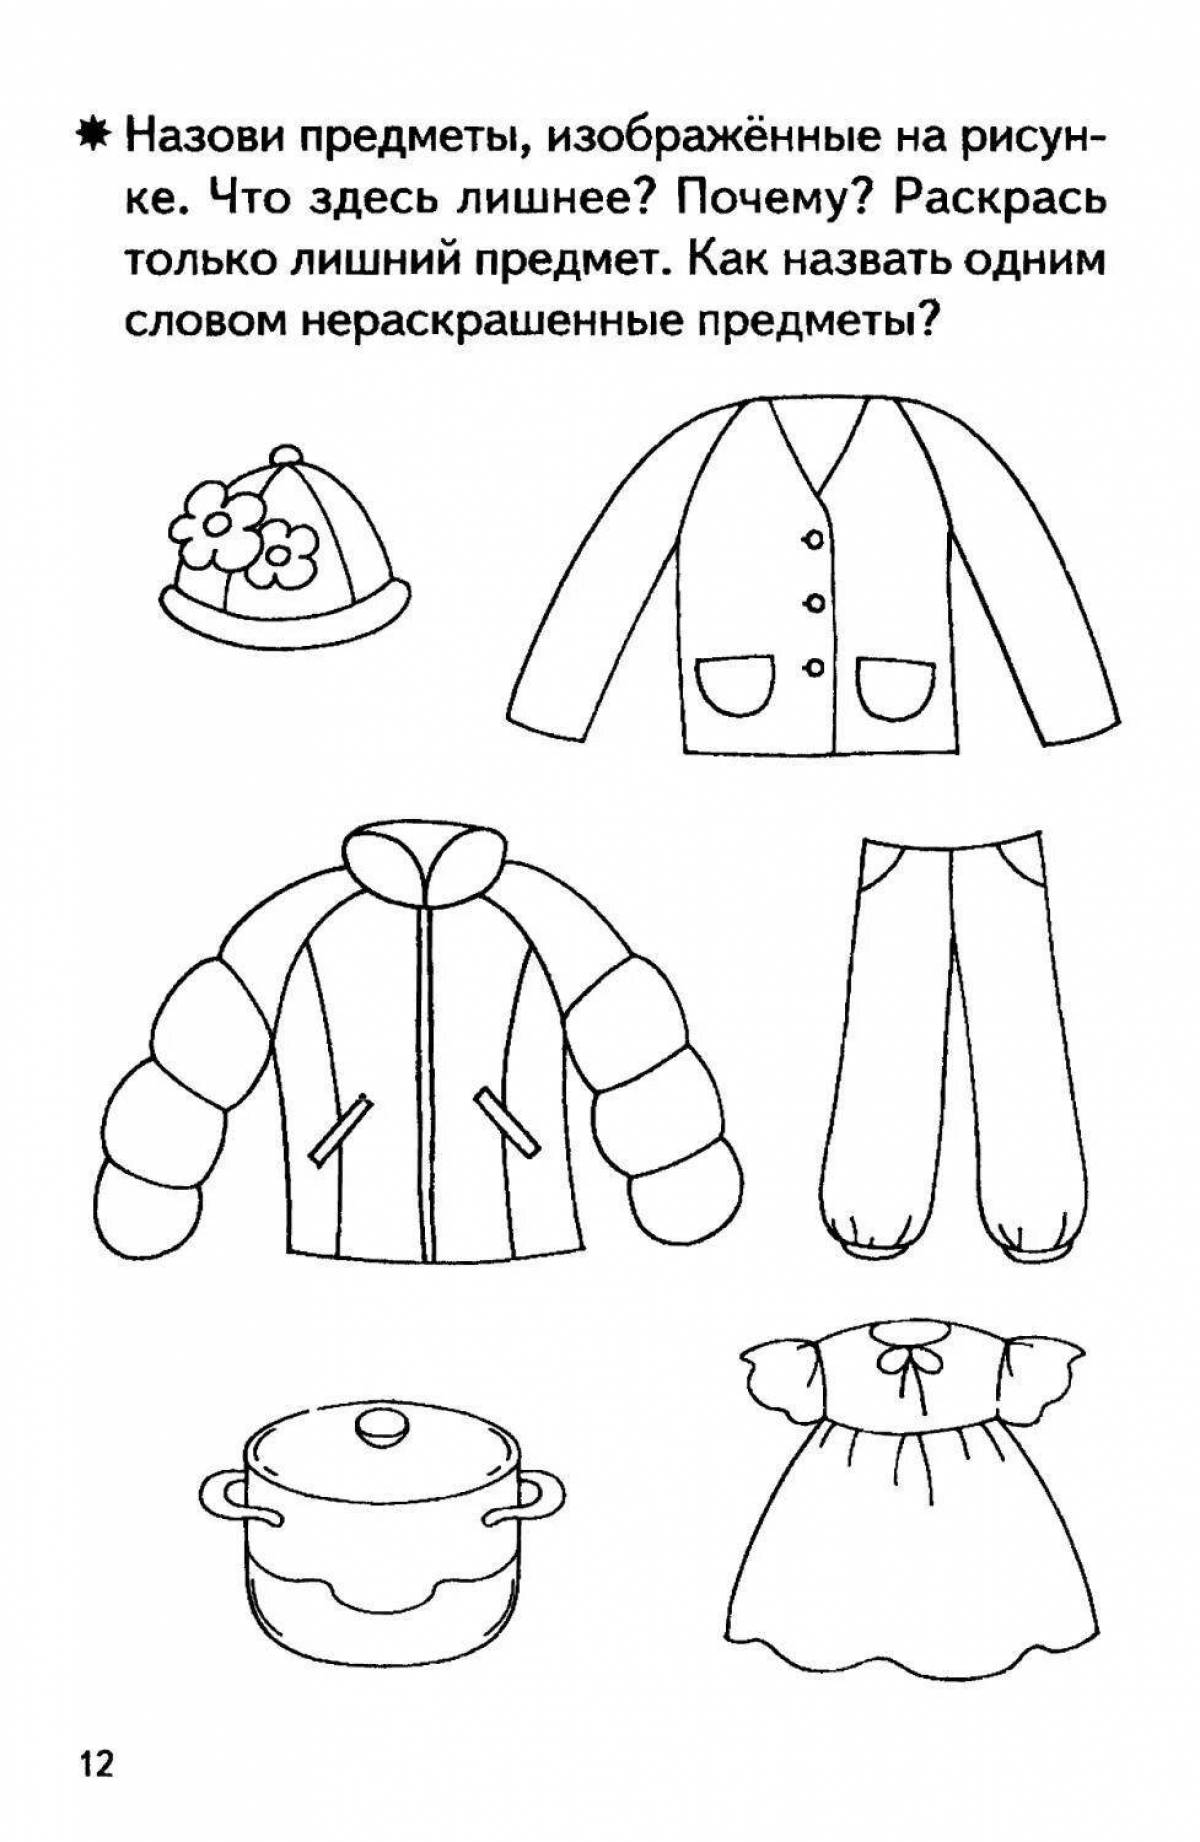 Coloring page energetic clothes for children 4-5 years old